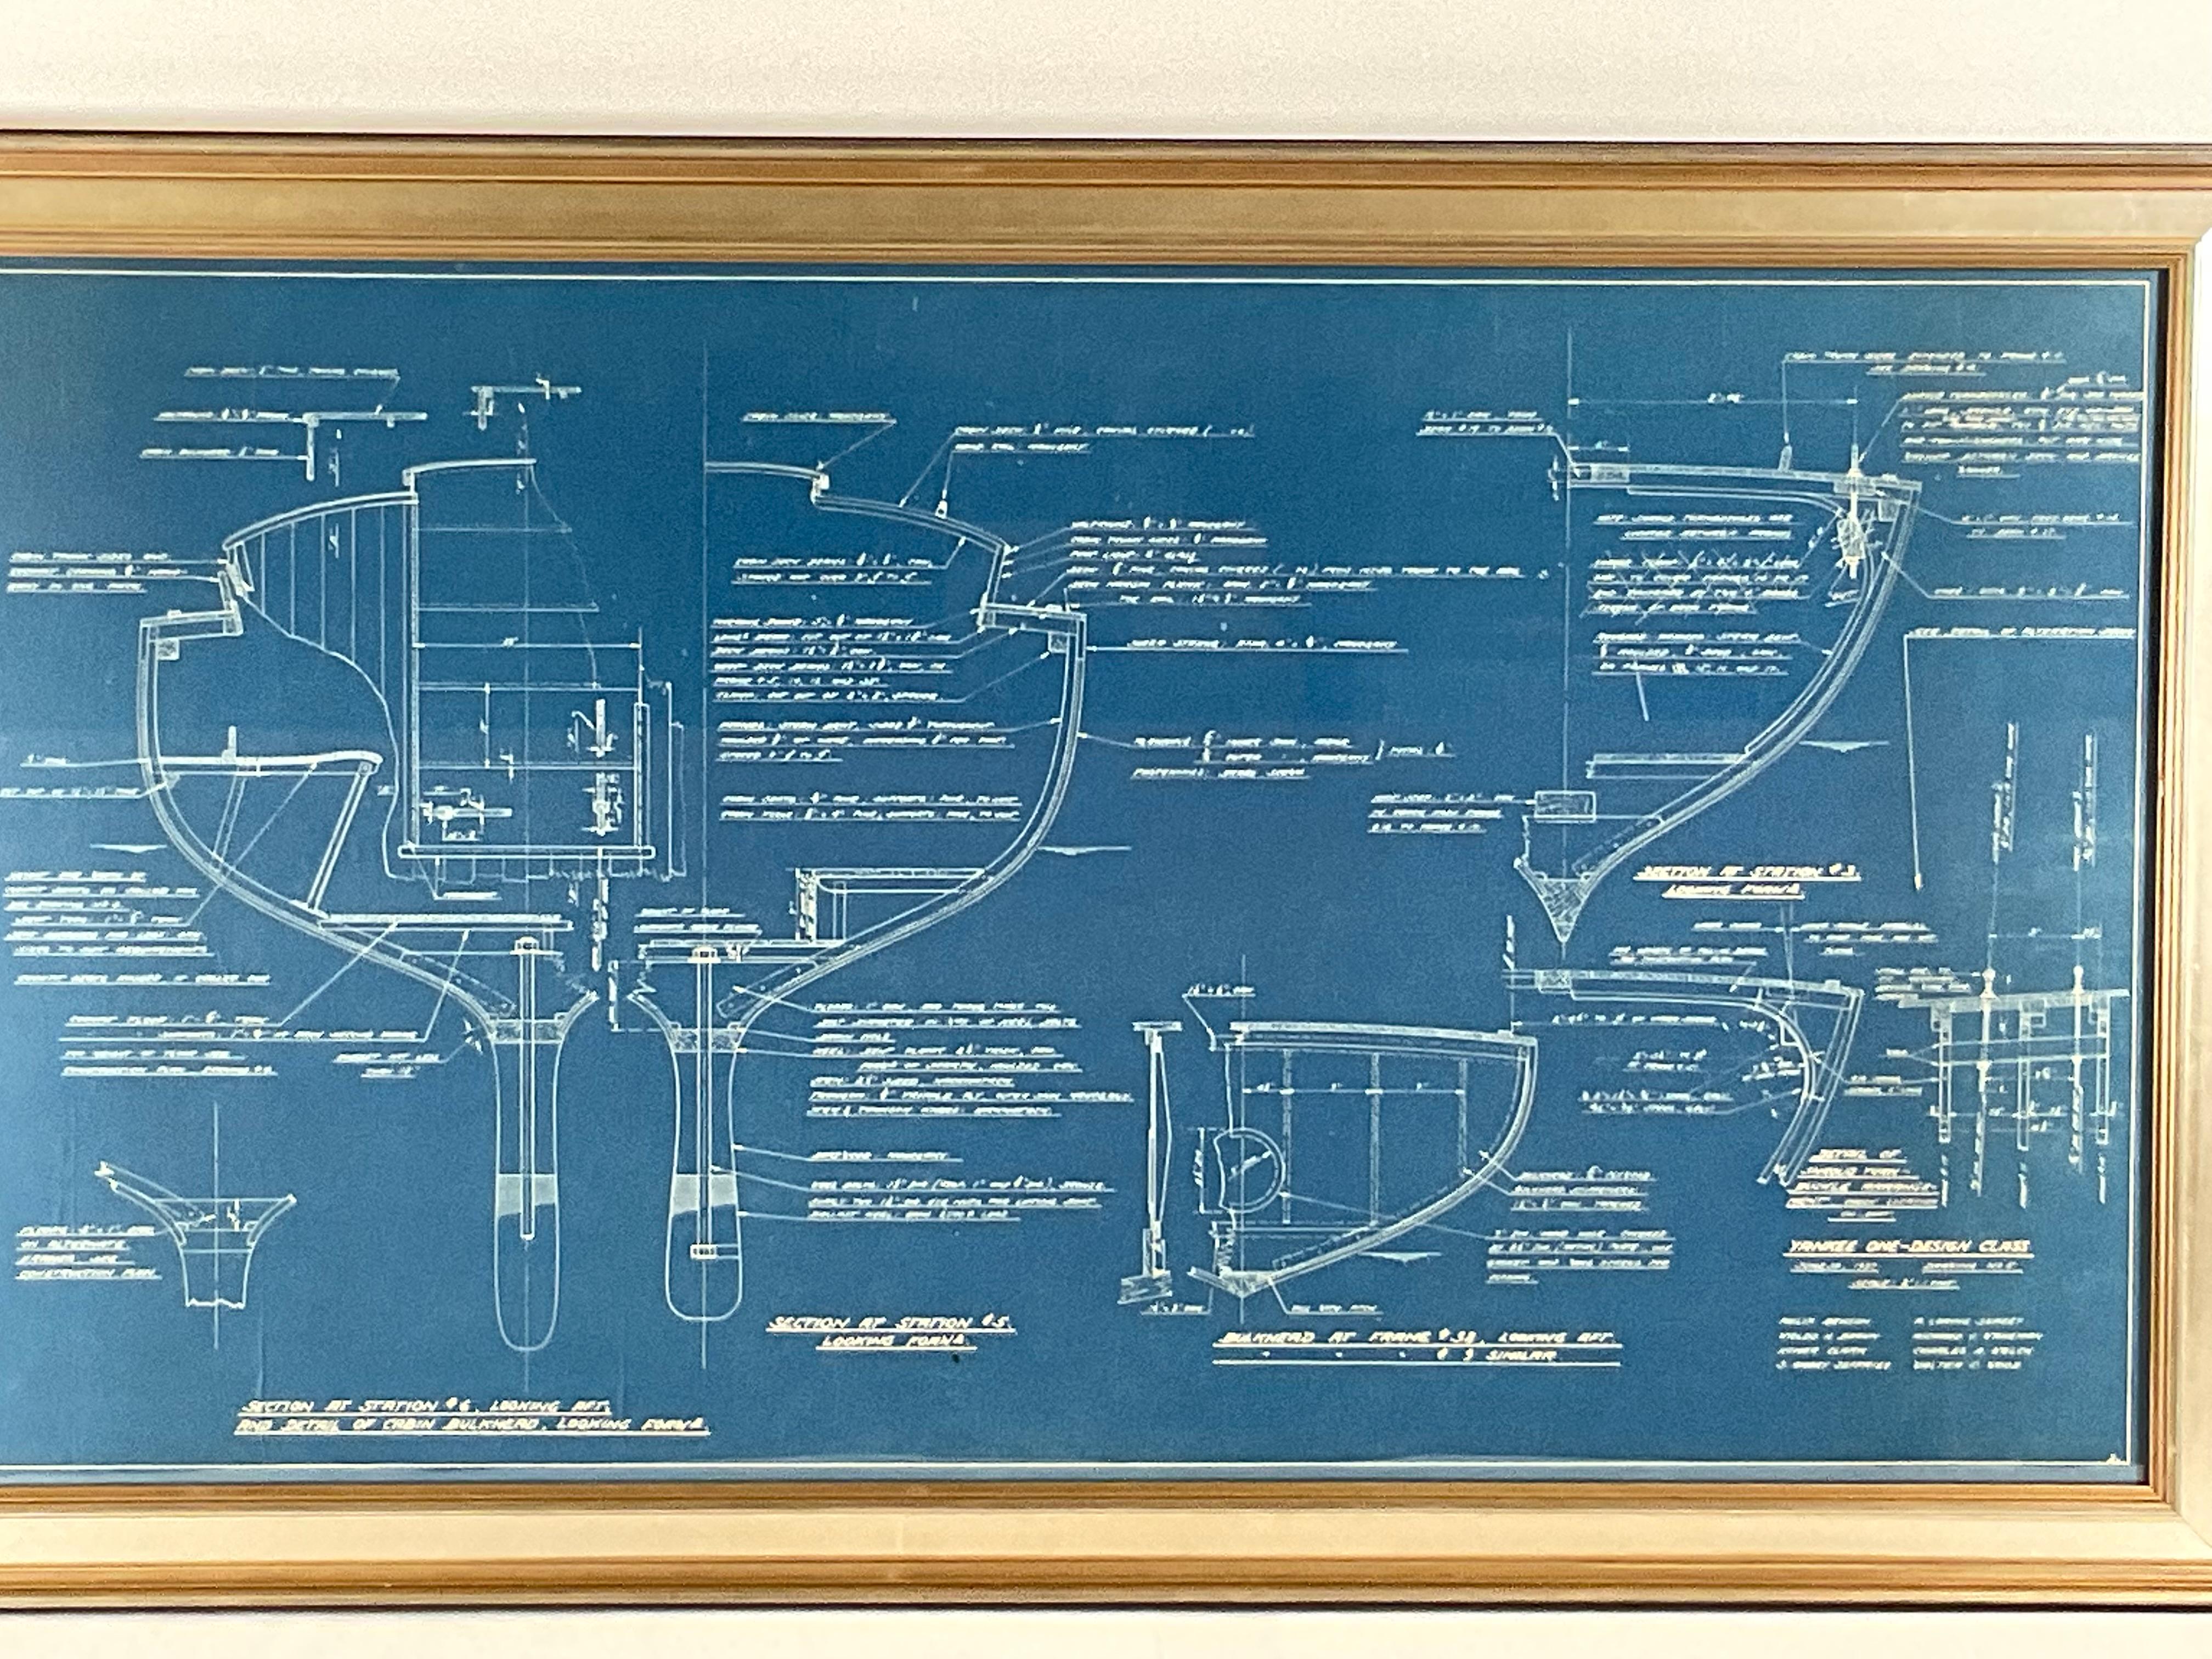 North American Yankee One Design Class Hull Blueprint For Sale